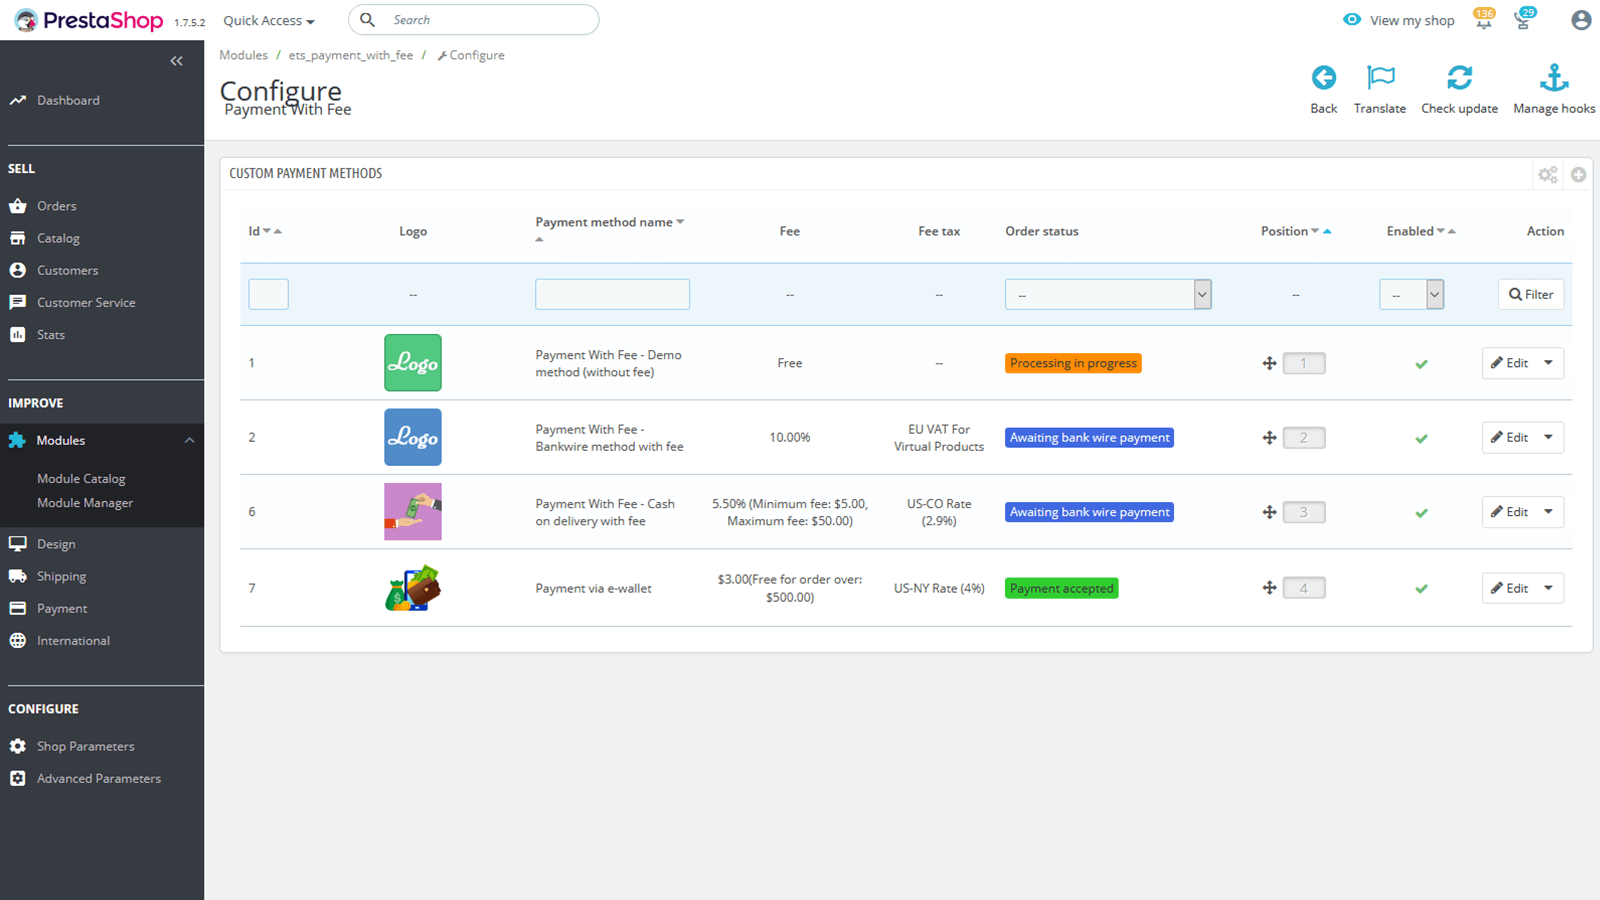 Screenshot showcasing the configuration options of Payment With Fee in PrestaShop